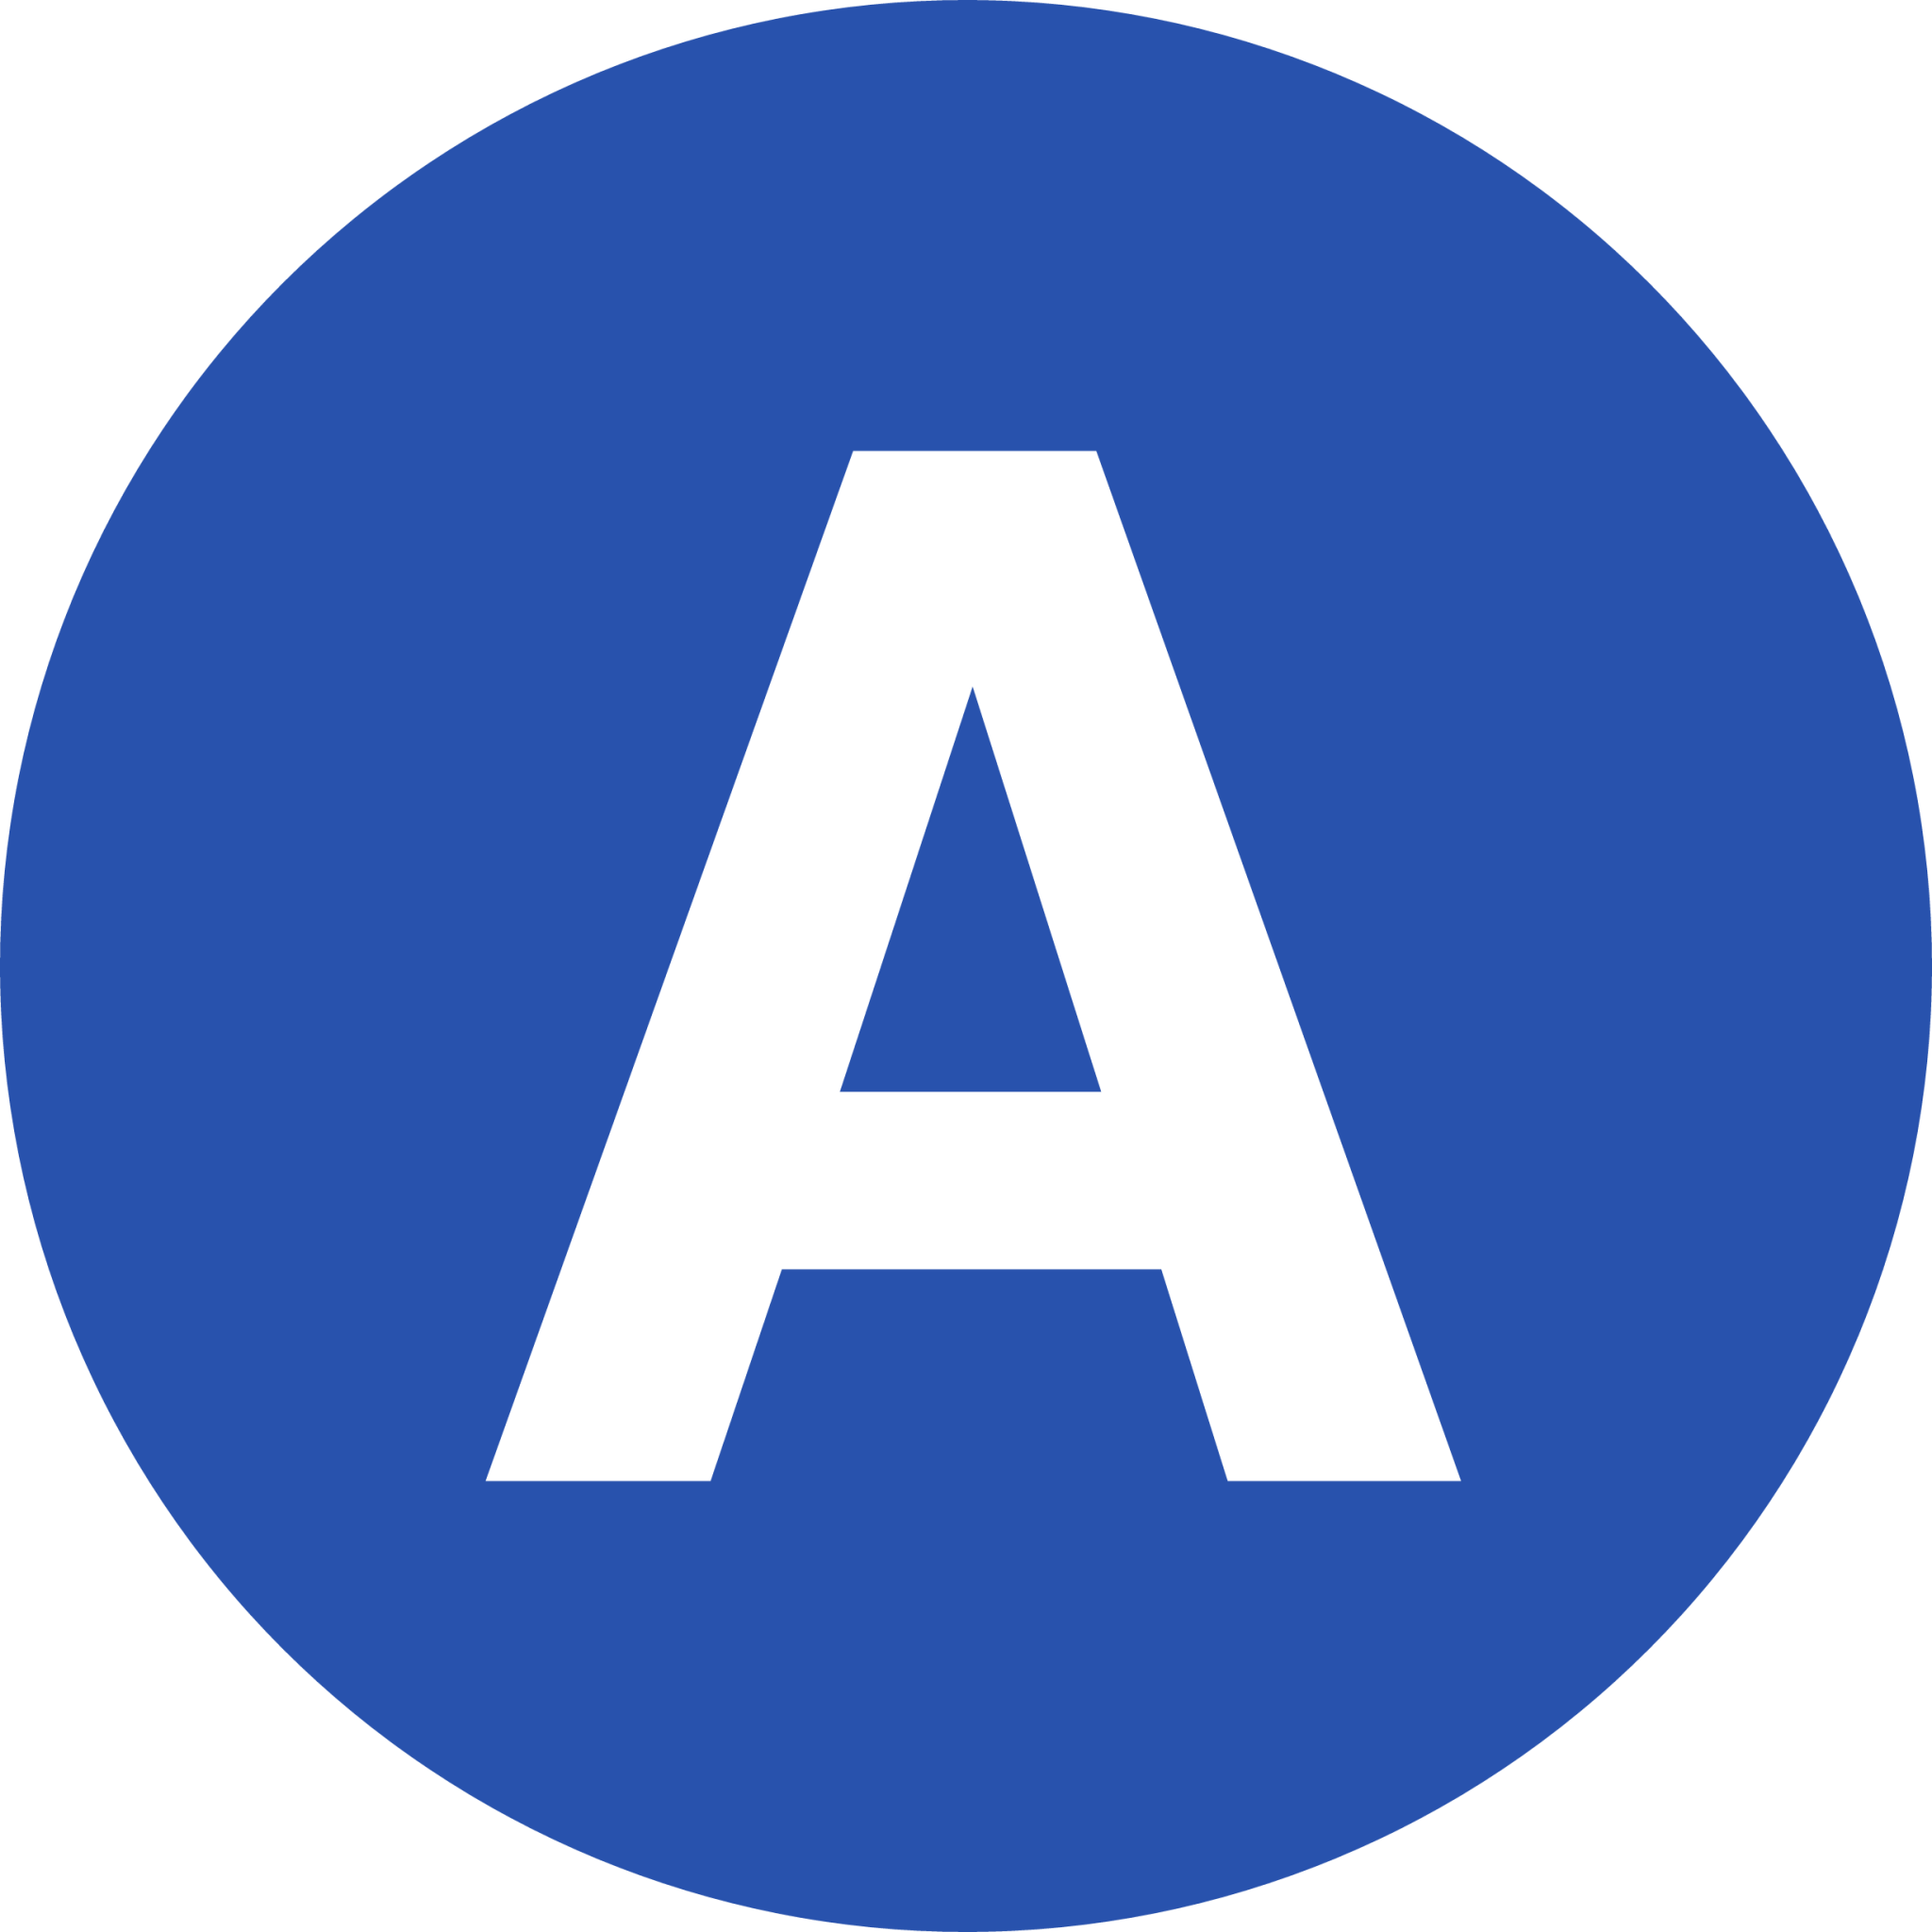 a letter icon